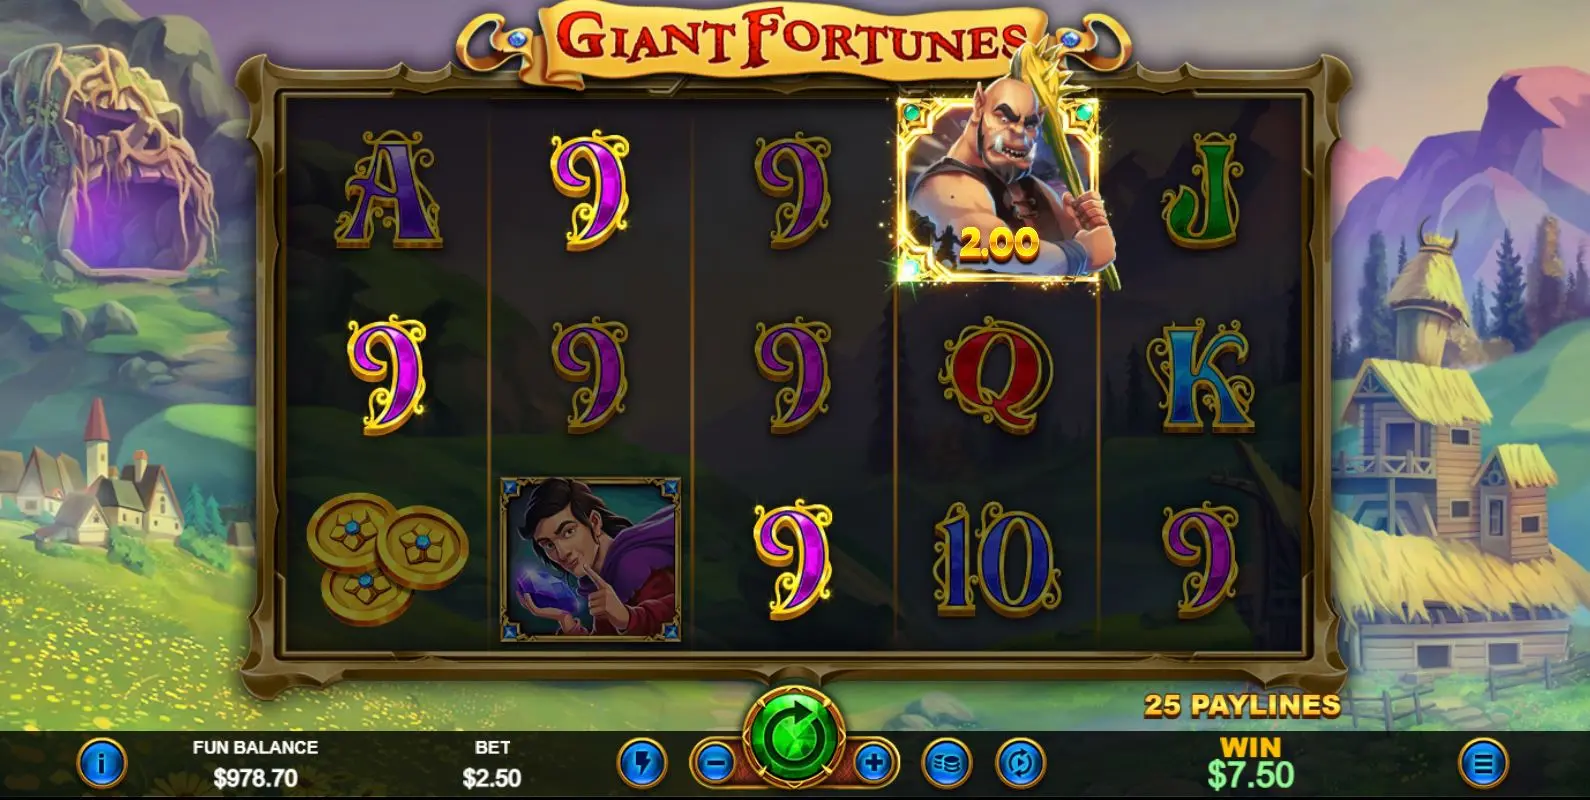 Giant Fortunes main features